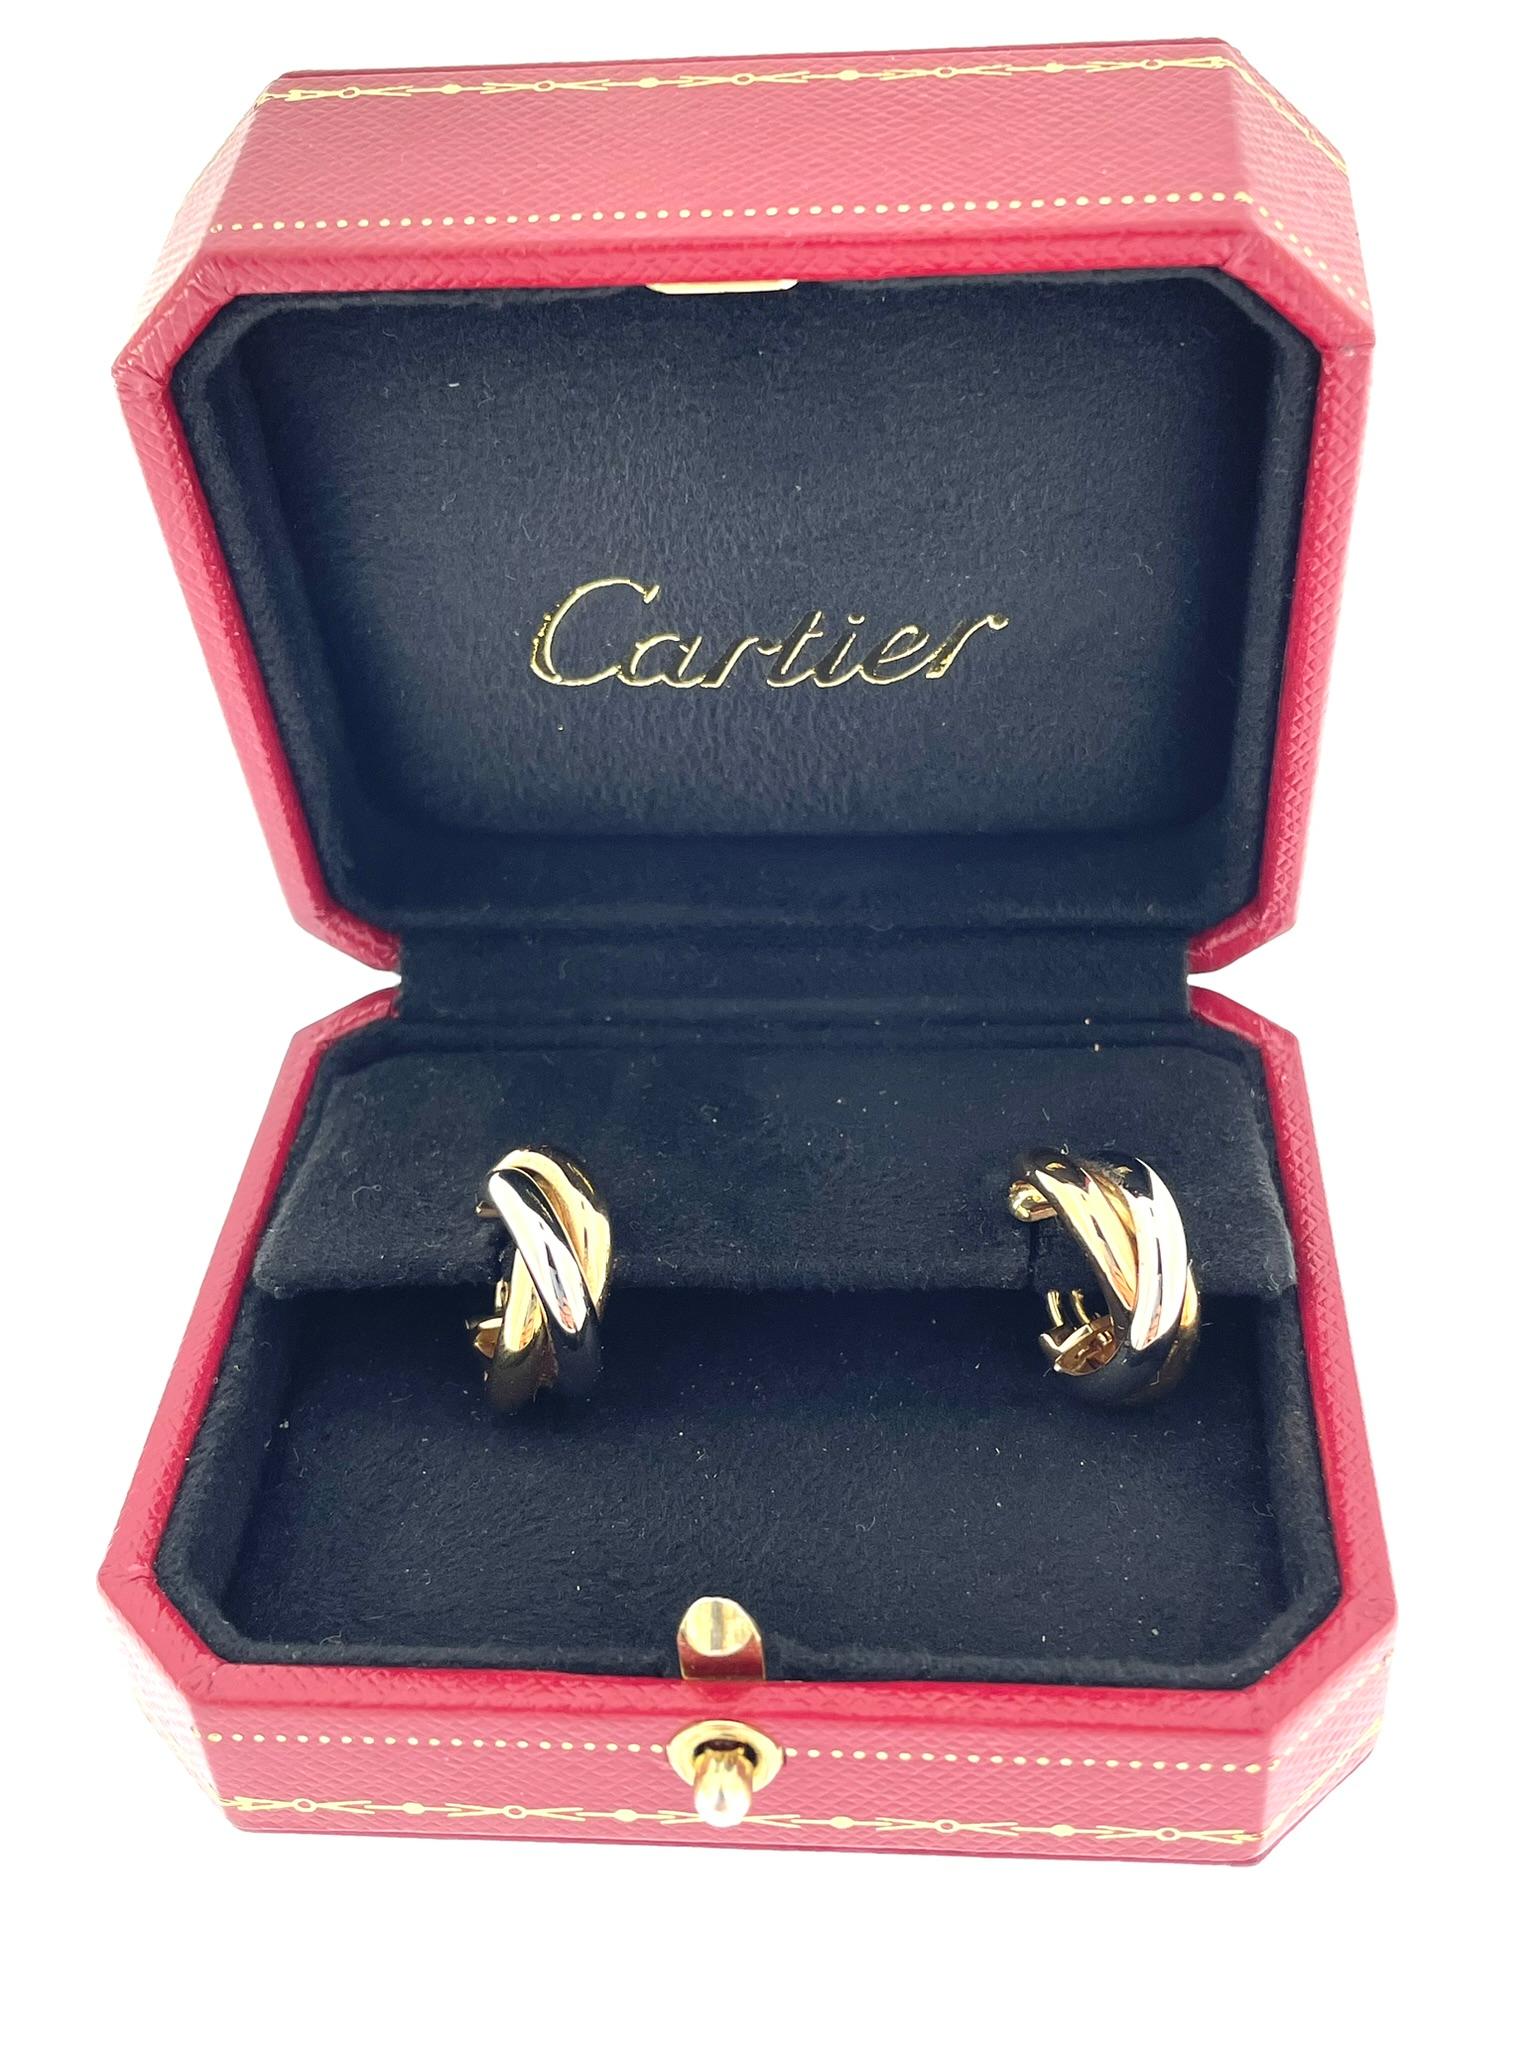 The Cartier Trinity Earrings in 18-karat gold are a luxurious and iconic accessory crafted by the renowned French jewelry house, Cartier. These earrings are part of the Trinity de Cartier collection, which is known for its timeless and symbolic